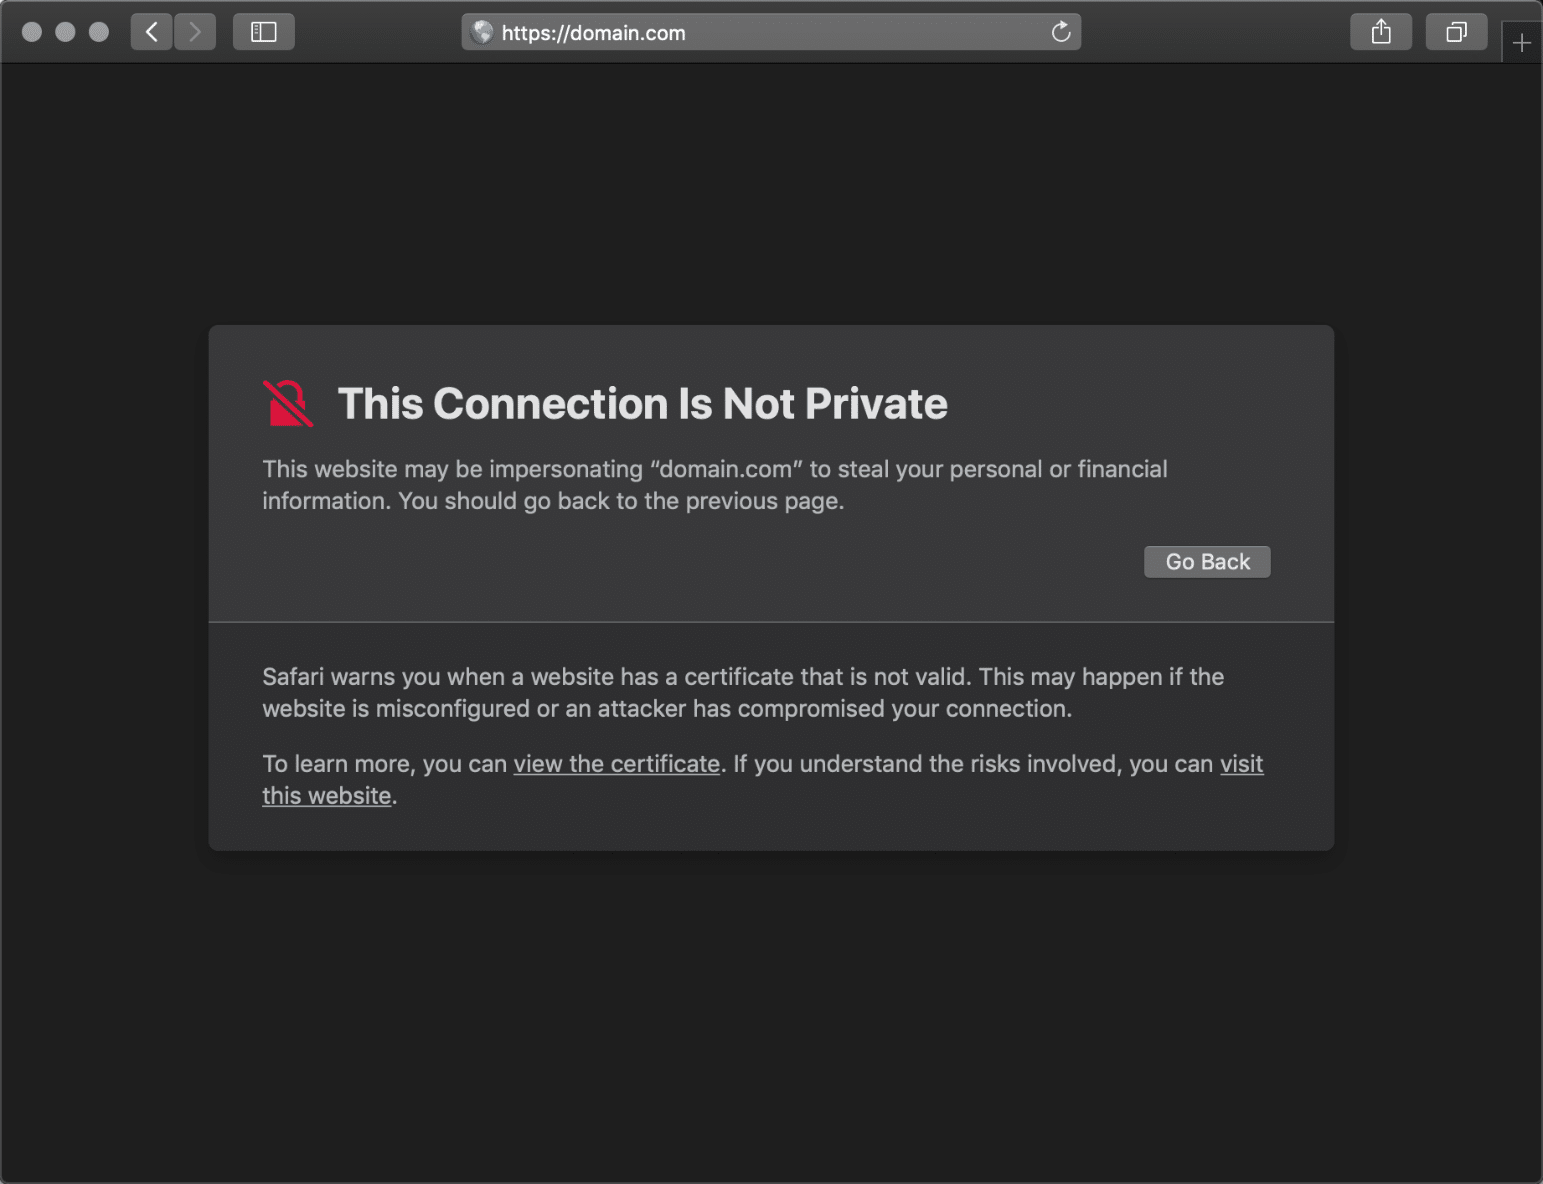 “Your connection is not private" Error in Safari